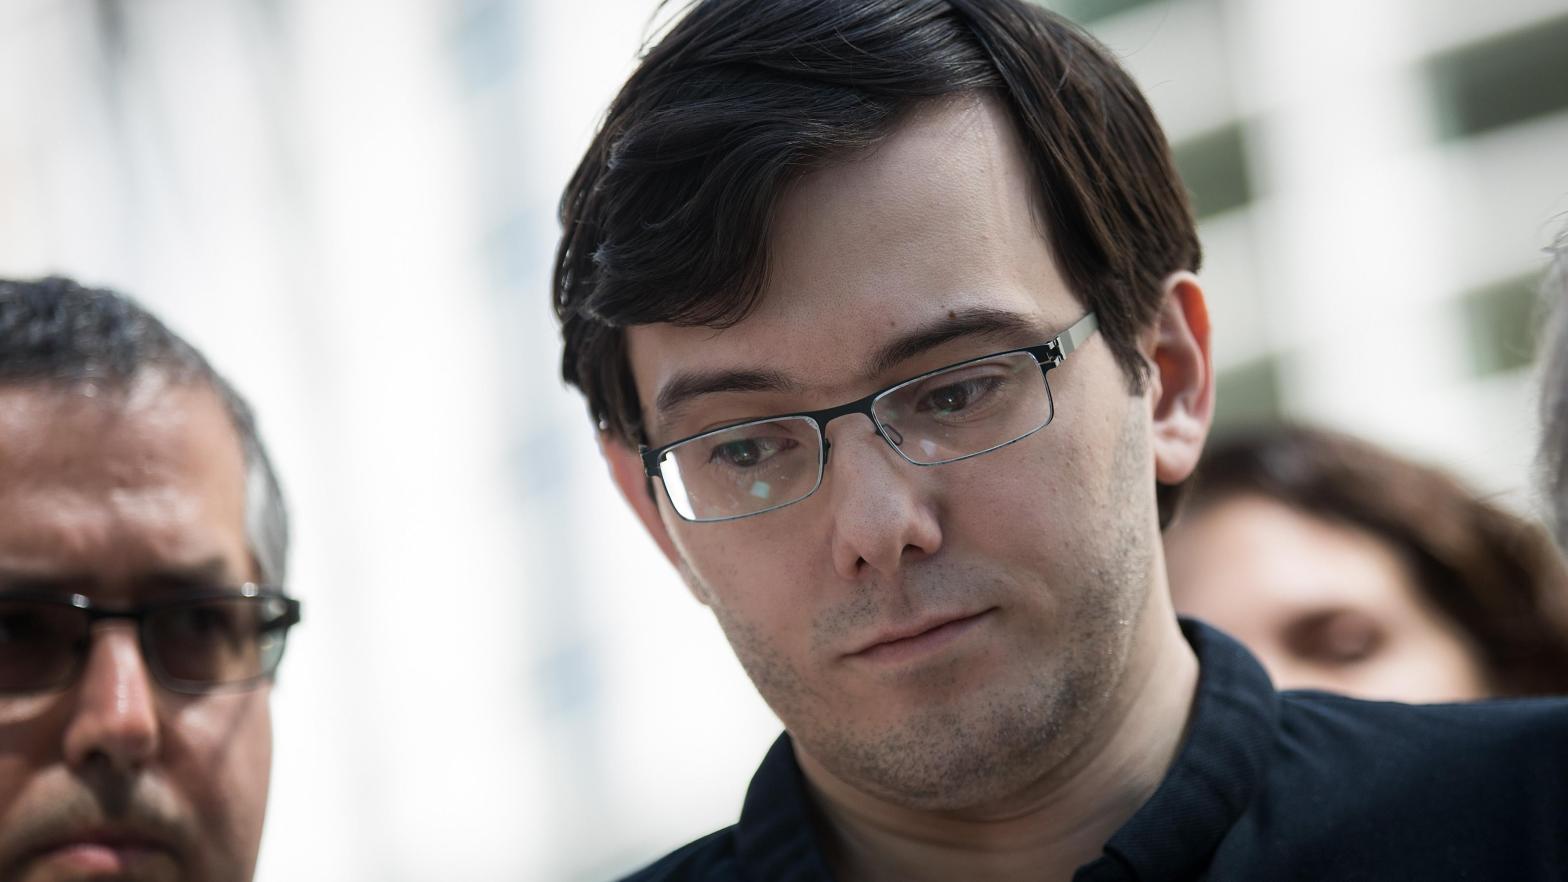 Martin Shkreli has been diving into the crypto scene through his company Druglike, though the FTC claimed it may be much too close to a pharmaceutical company considering he's been barred from ever working in that industry again. (Photo: Drew Angerer, Getty Images)